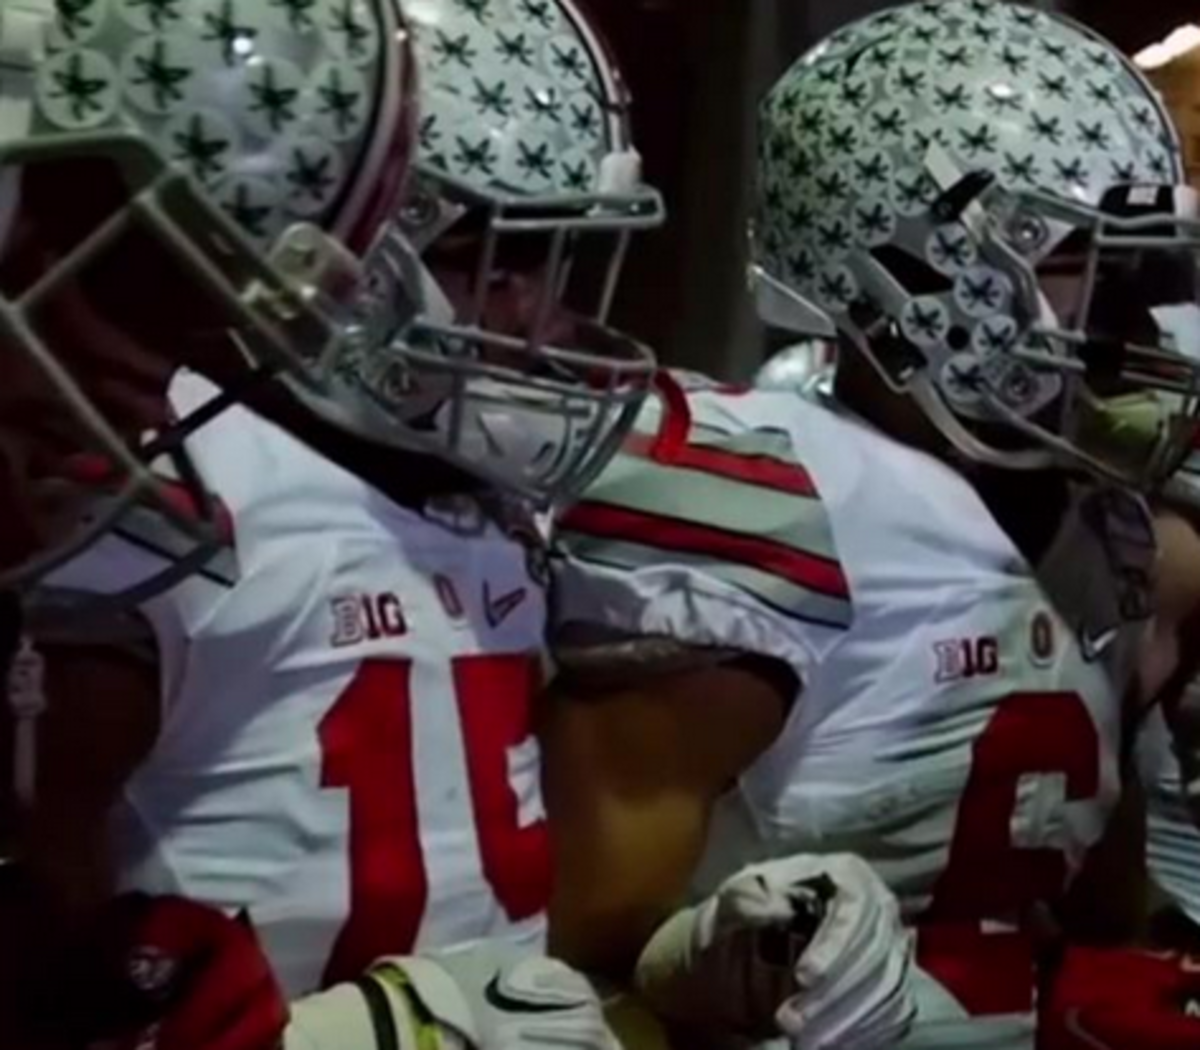 Ohio State players link arms before a game.